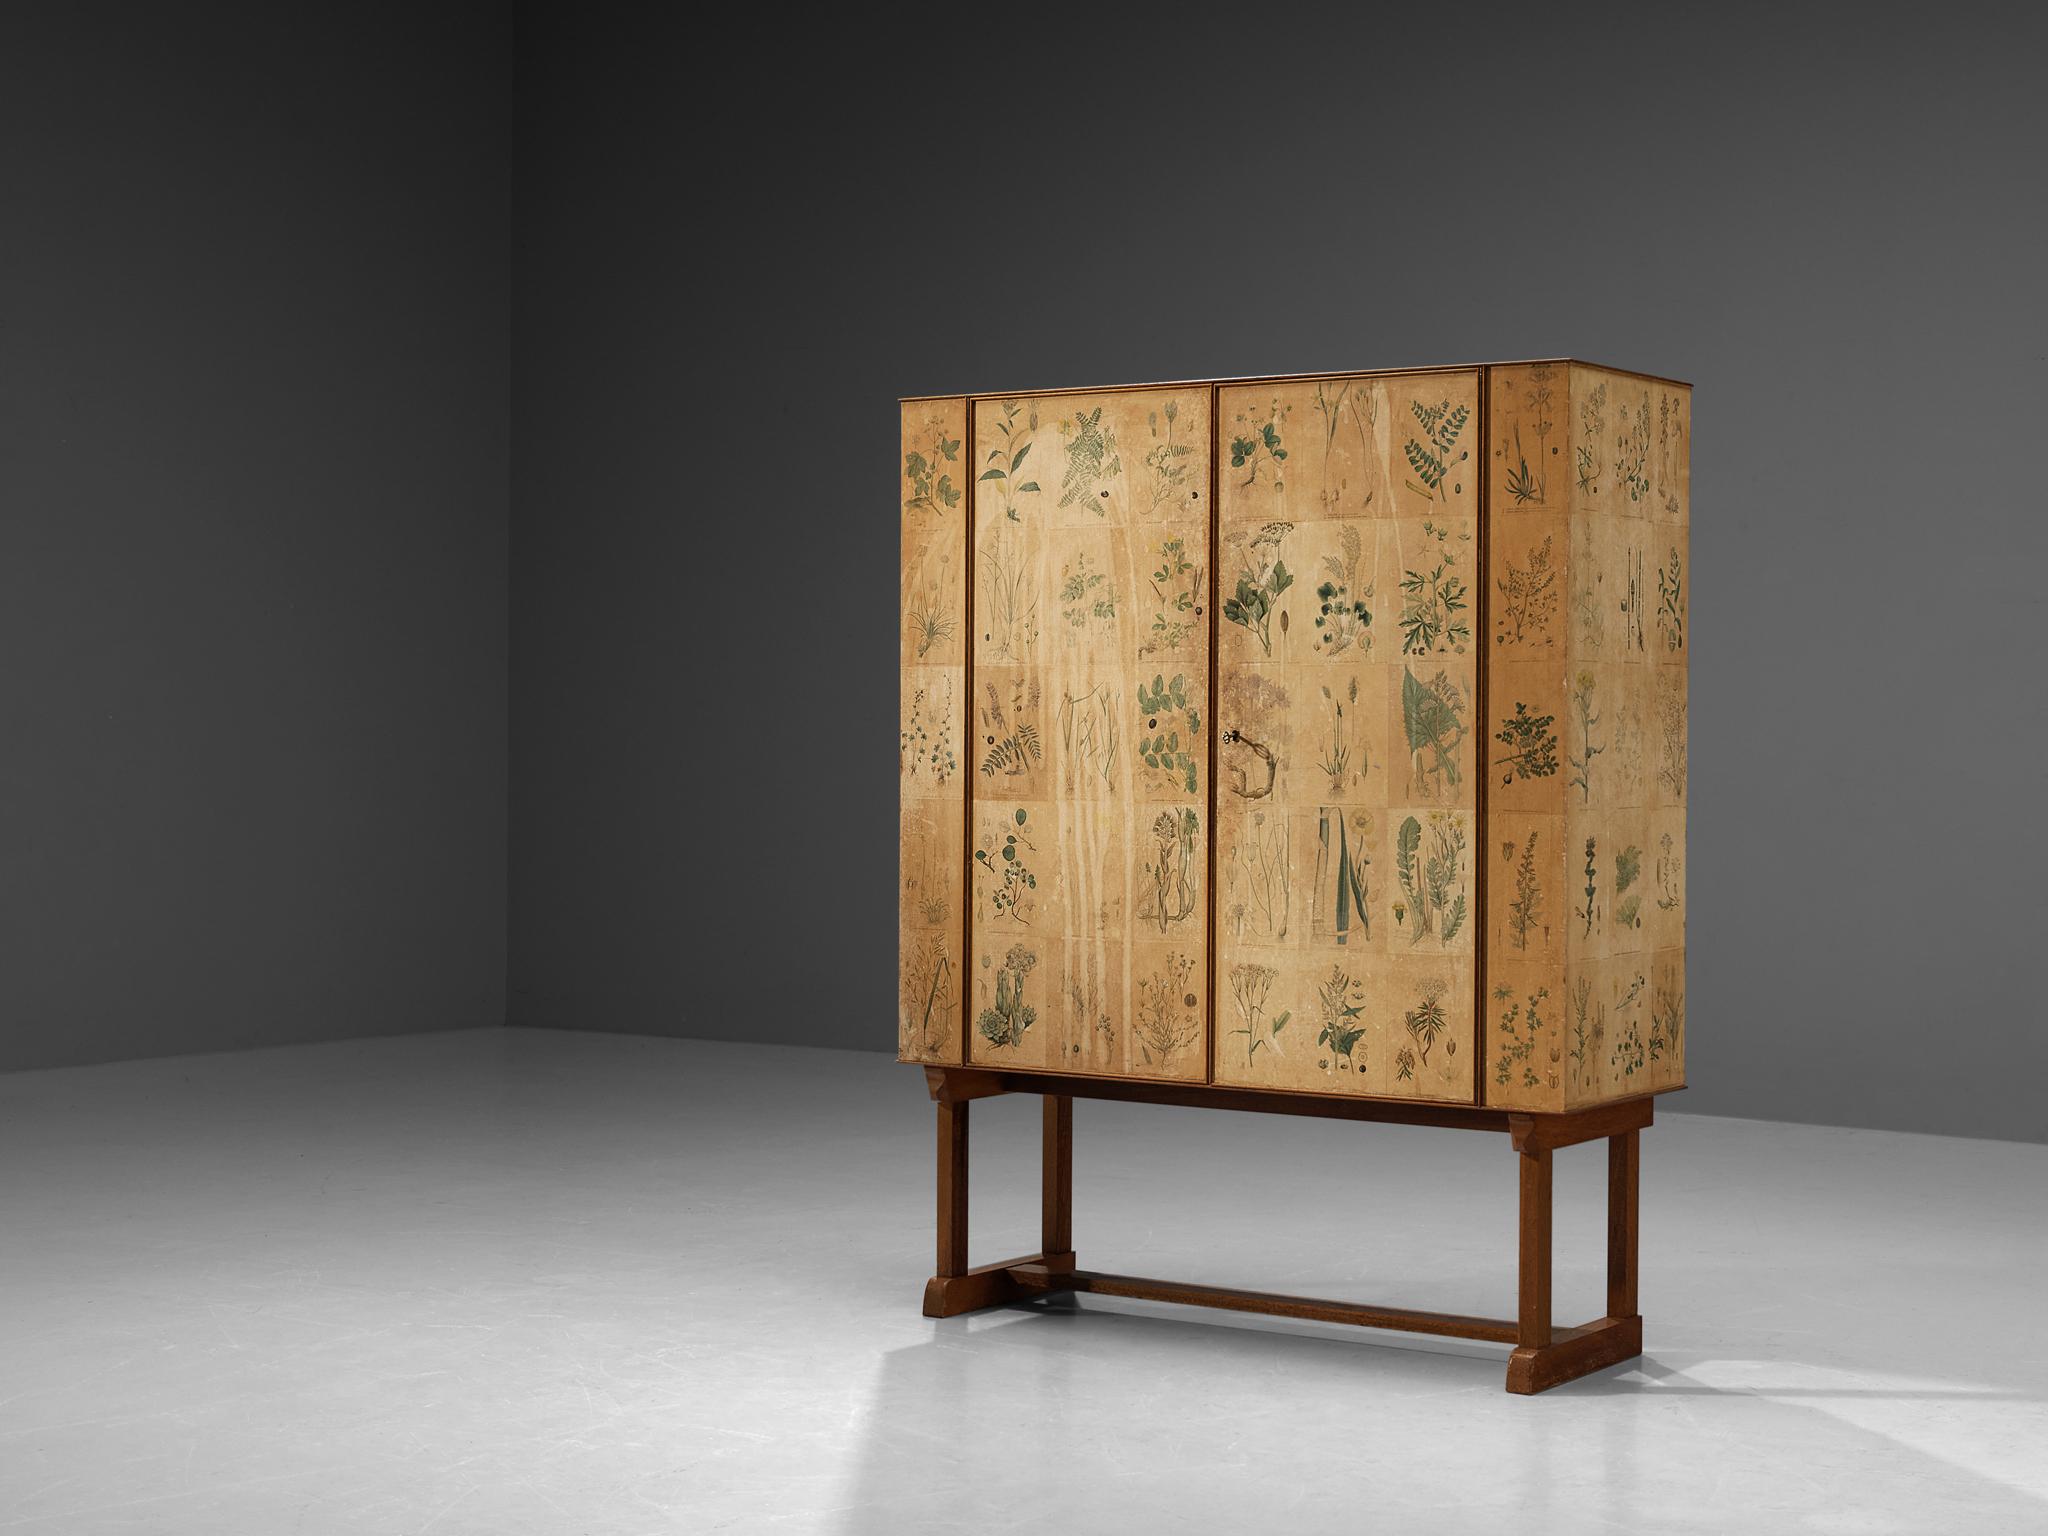 Josef Frank for Svenskt Tenn, cabinet ‘Flora’, early edition model 852, mahogany, oak, hand-colored paper, Sweden, designed circa 1937/38, produced 1946/47s. 

This cabinet follows Frank’s idea to design the surfaces of cabinets in a different,